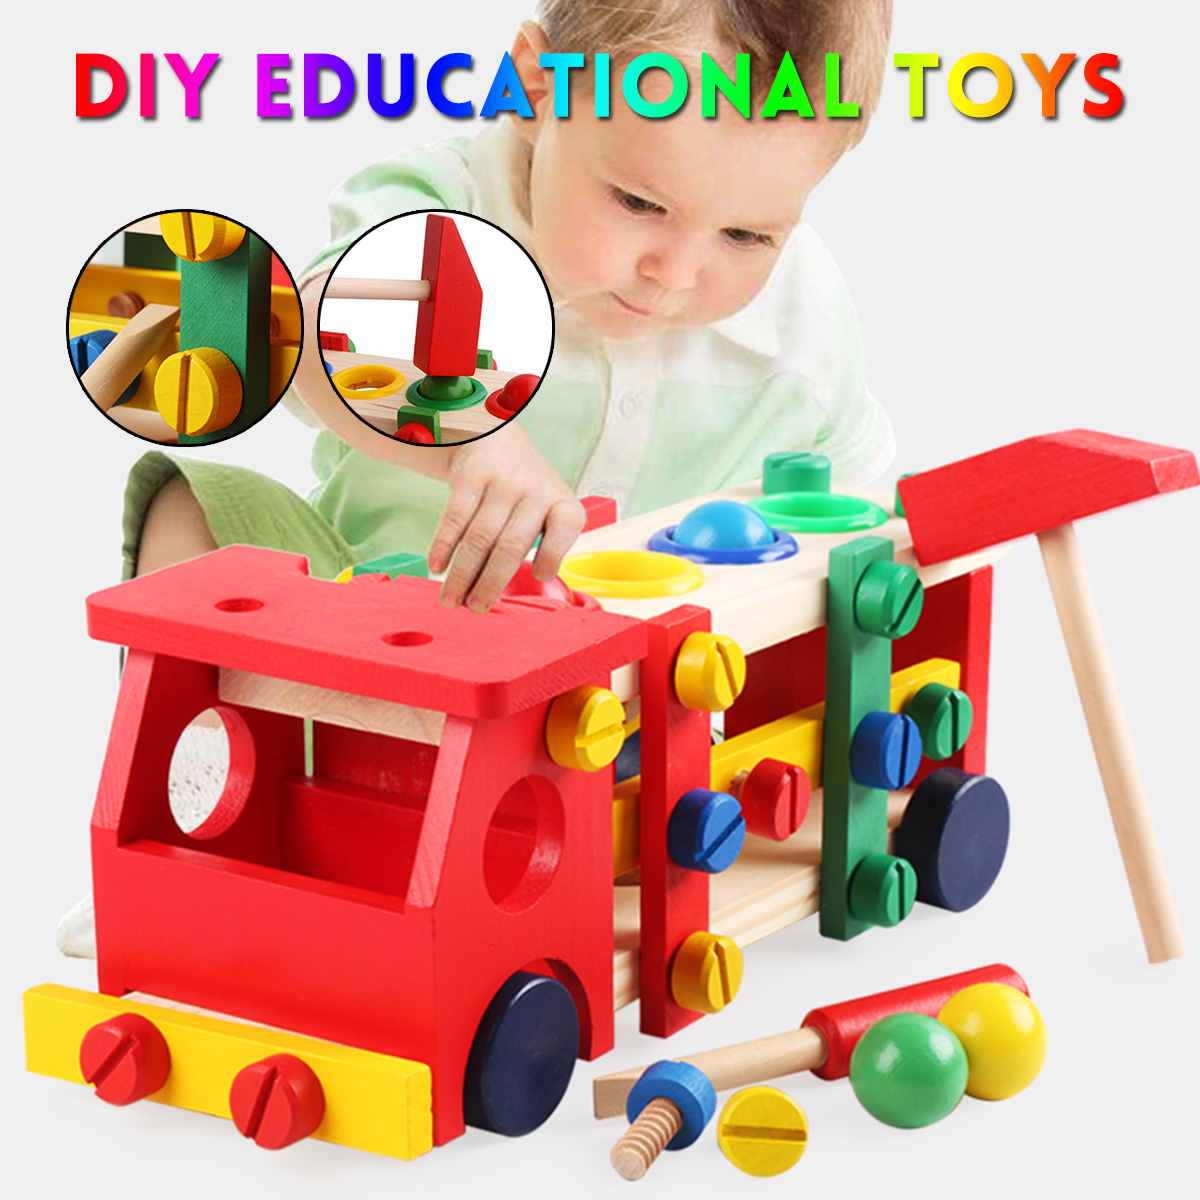 DIY-Educational-Toys-Kids-Exercise-Practical-Wooden-IQ-Game-Car-Assemble-Building-Gift-Training-Brai-1598139-1